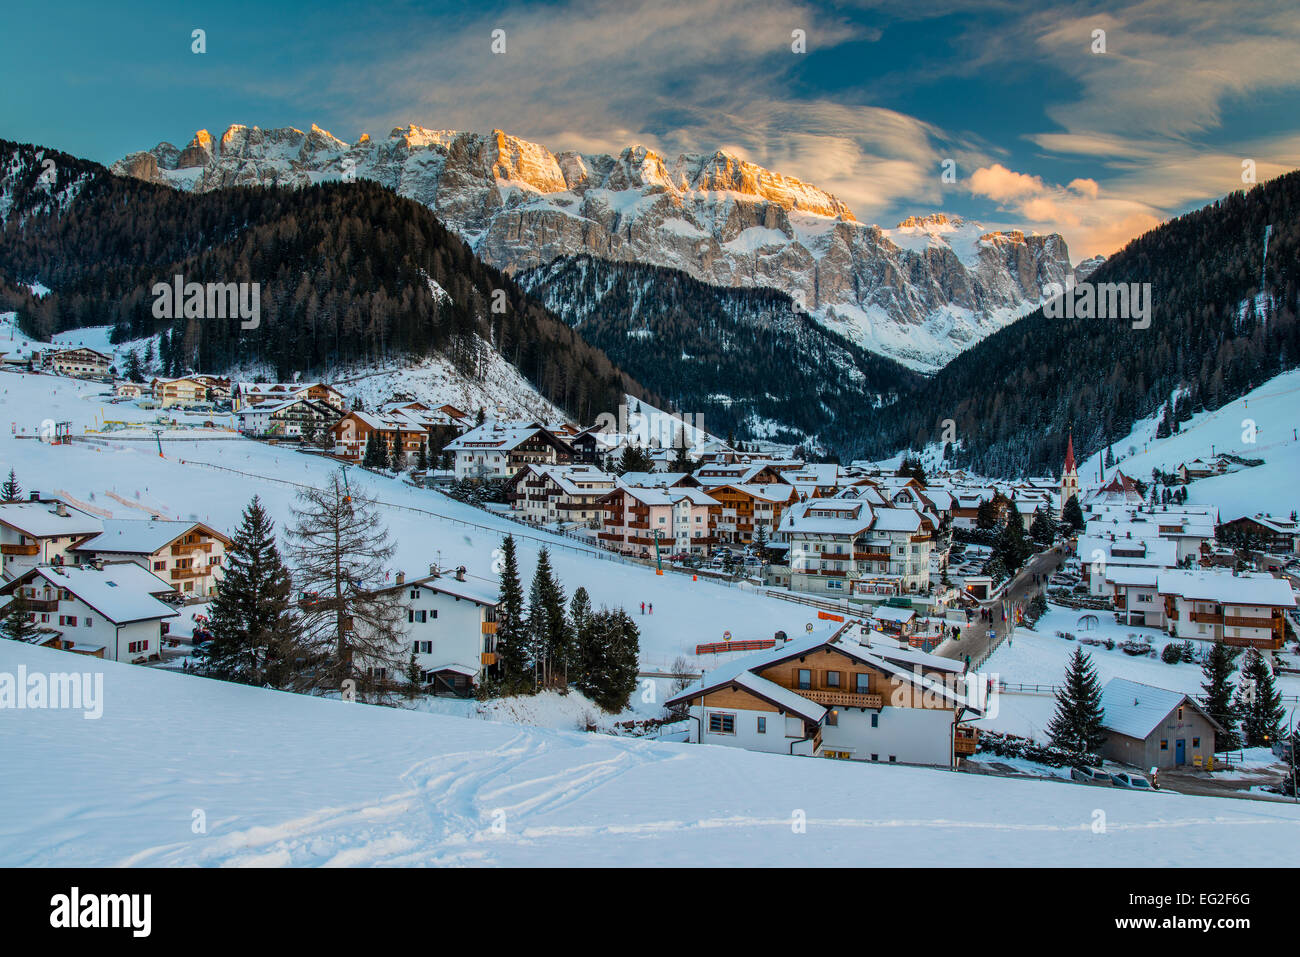 Winter view at sunset of Selva di Val Gardena with Sella massif in the background, Dolomites, Alto Adige - South Tyrol, Italy Stock Photo